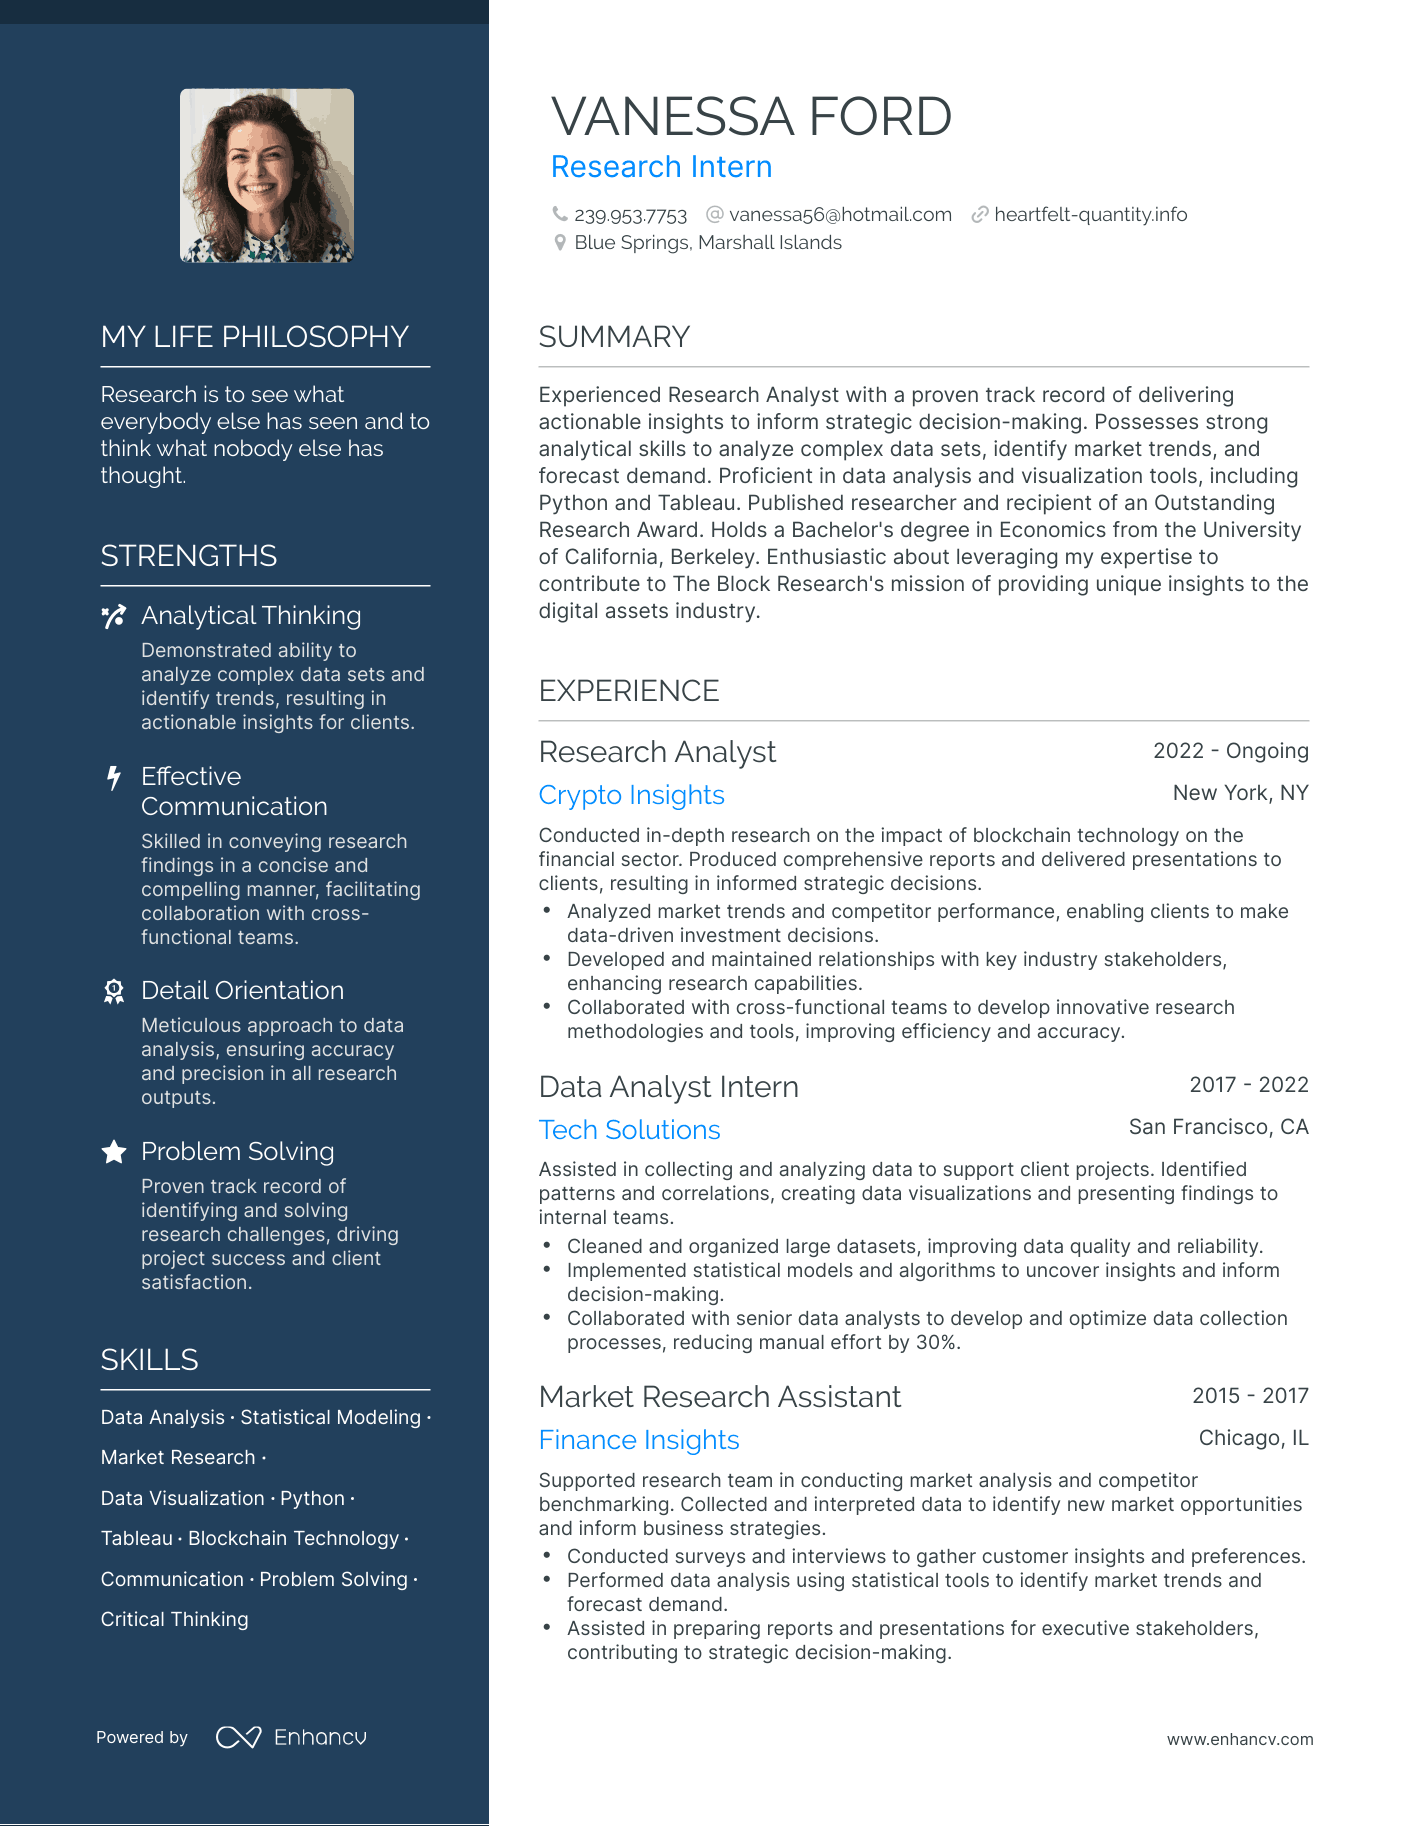 Research Intern resume example